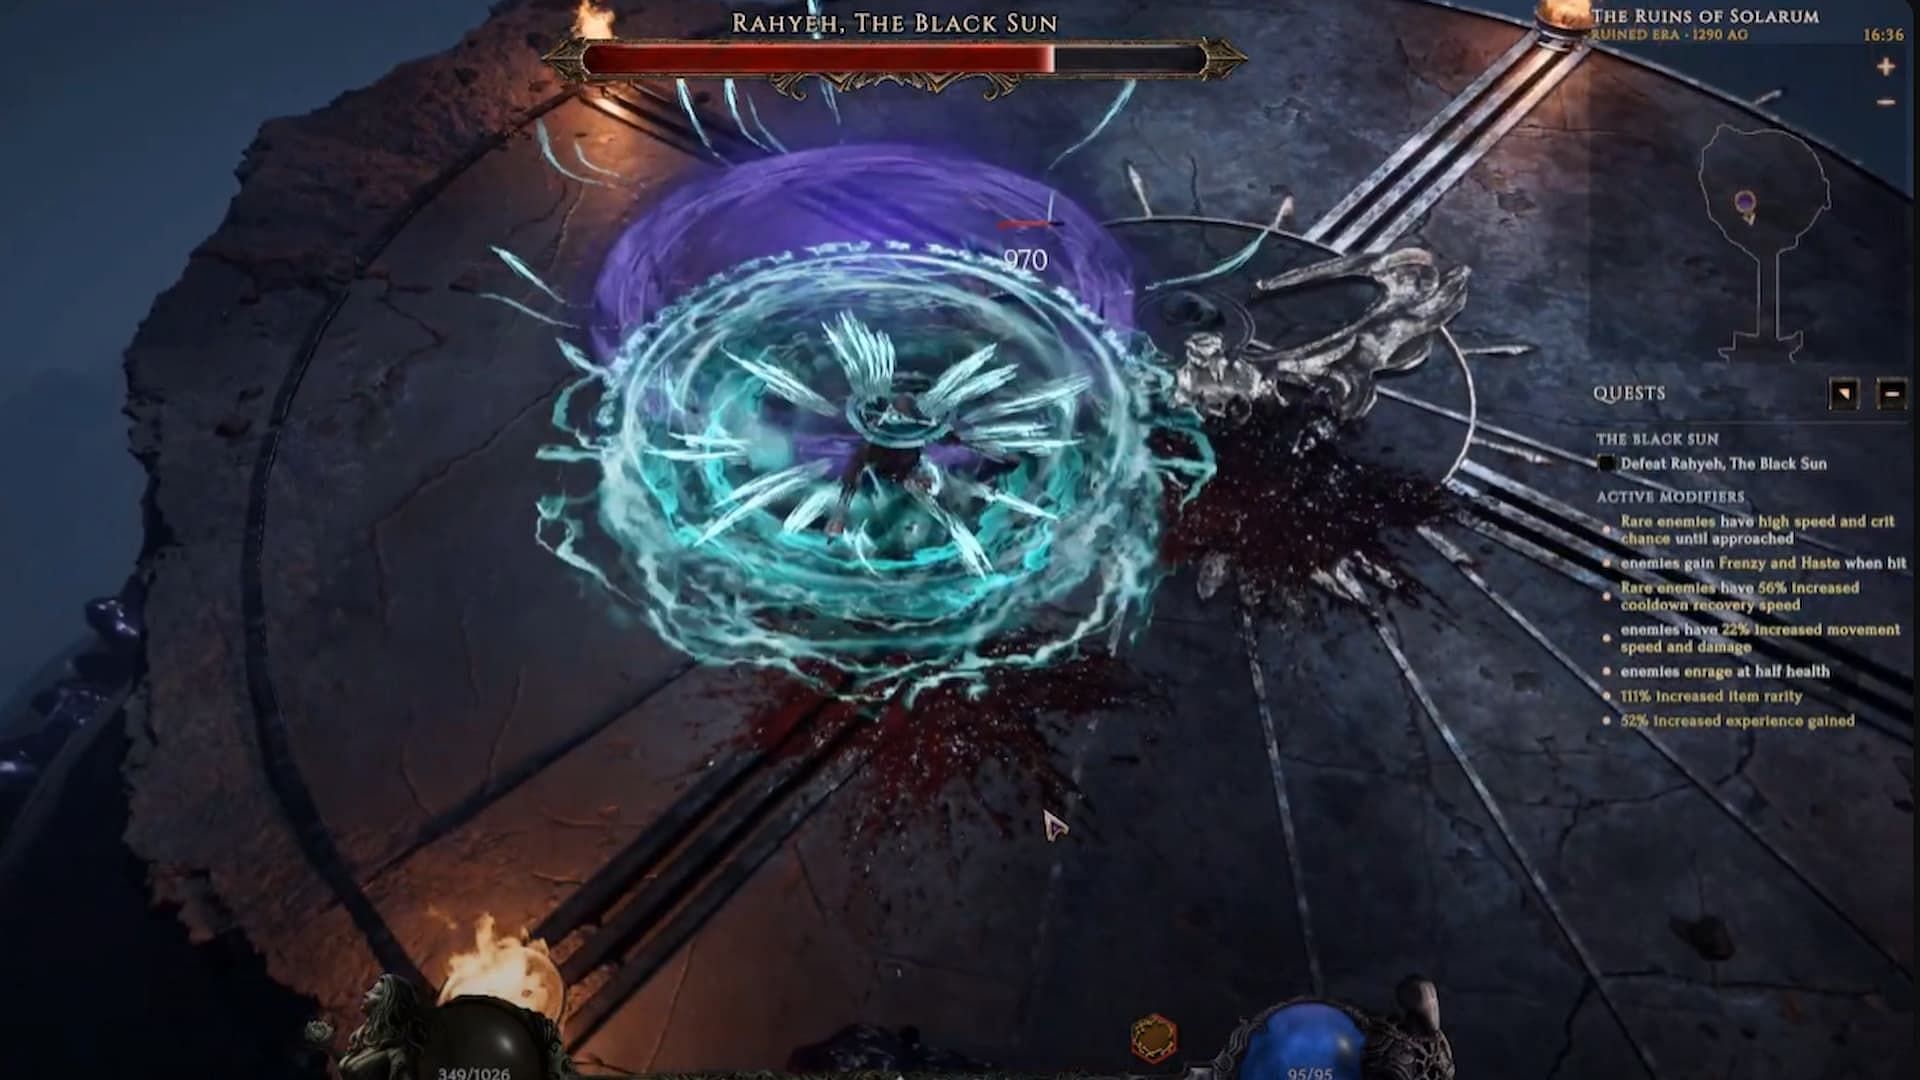 Unique weapons in Last Epoch can drop from bosses in Monoliths (Image via Eleventh Hour Games and Heavy Gaming/Youtube)